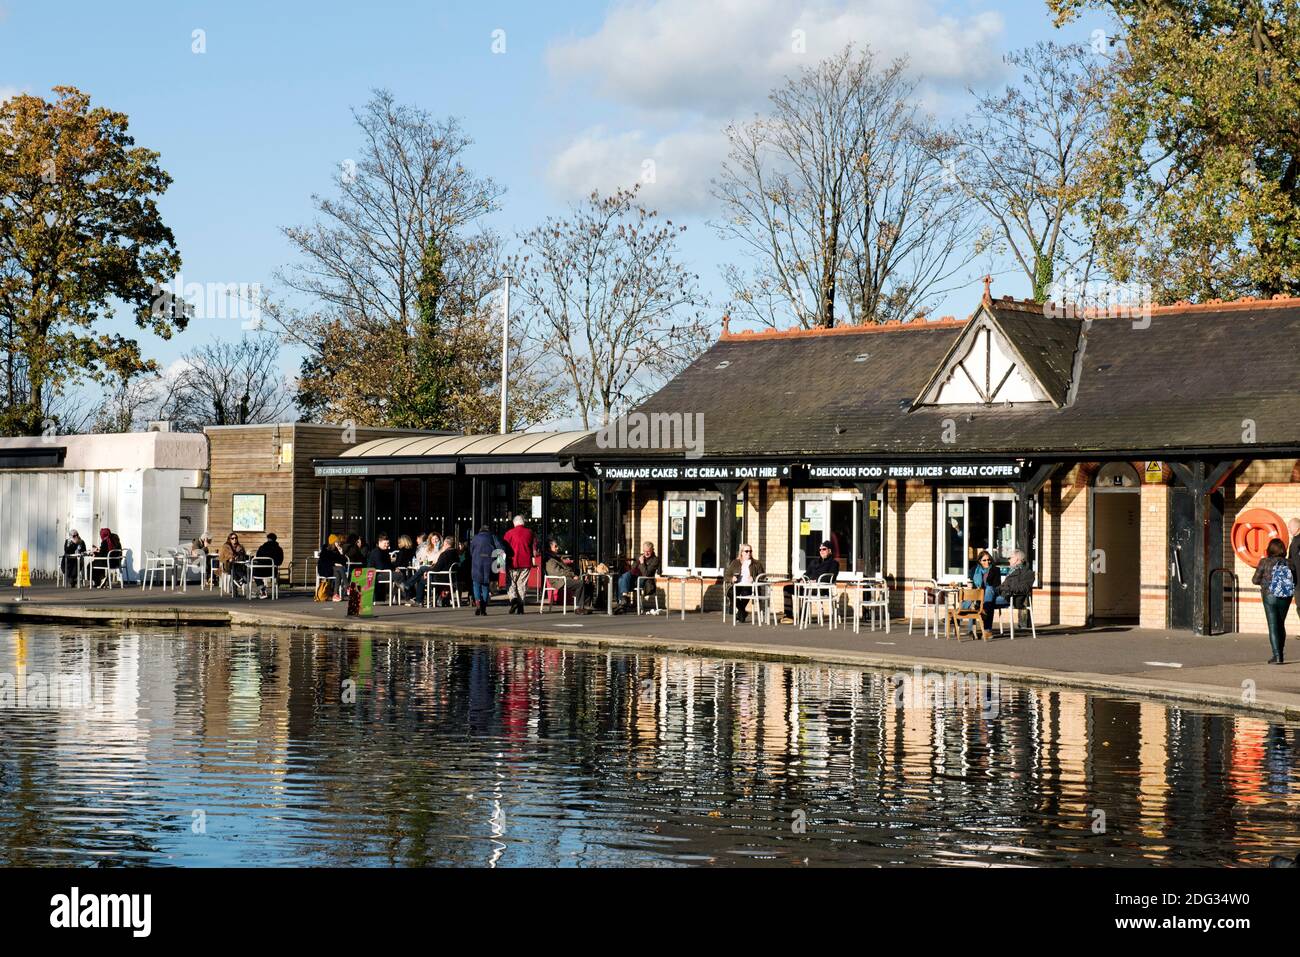 Lakeside Café with people outside at tables seen across boating lake Alexandra Palace Park, London Borough of Haringey Stock Photo